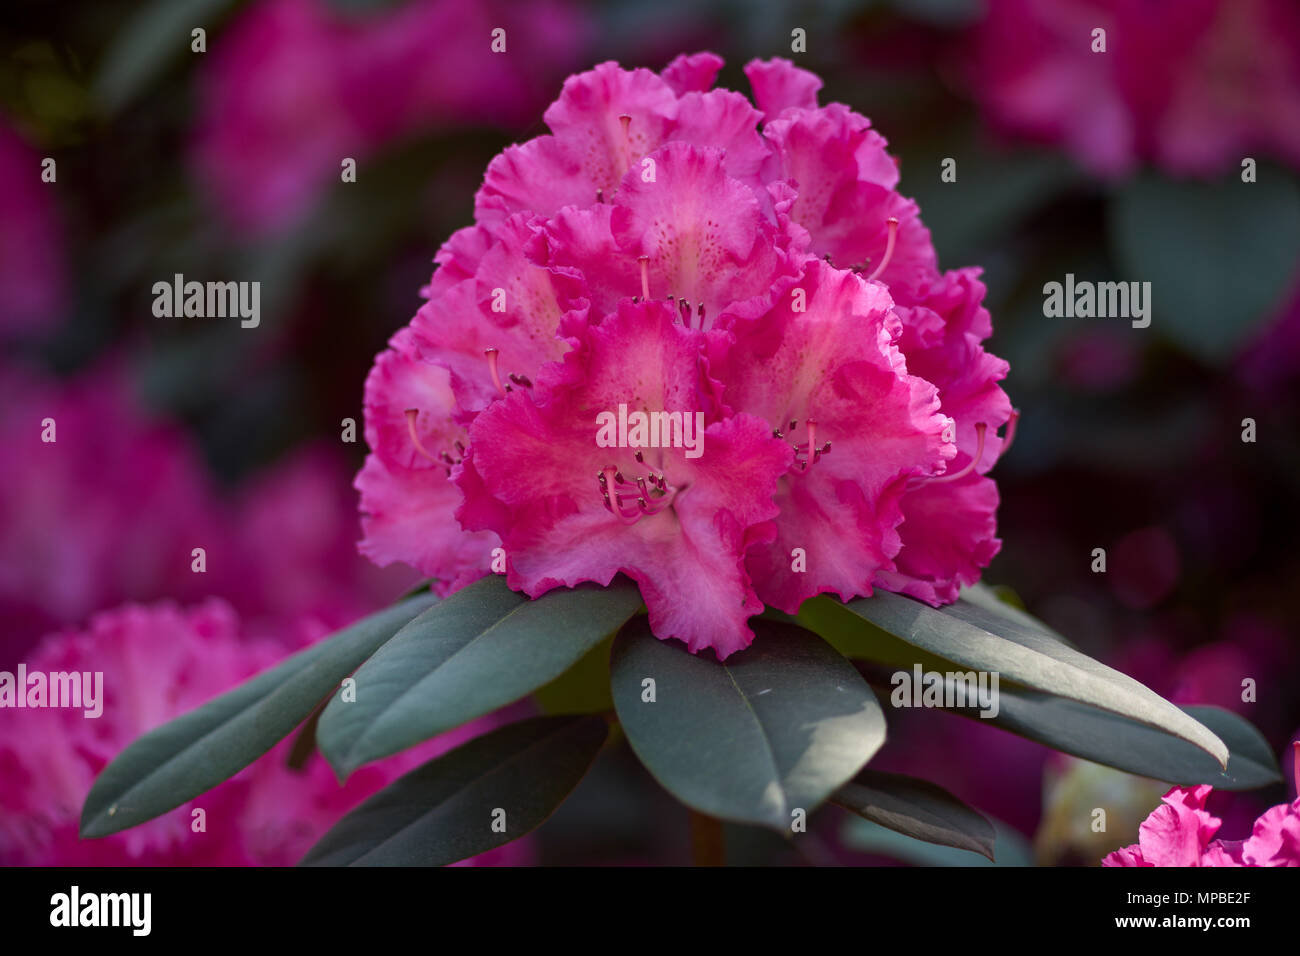 Rhododendron Germania pink blossom Lush rhododendron flowers close up Rhododendron blooming Rhododendron flowering spring Rhodendron blooms Stock Photo